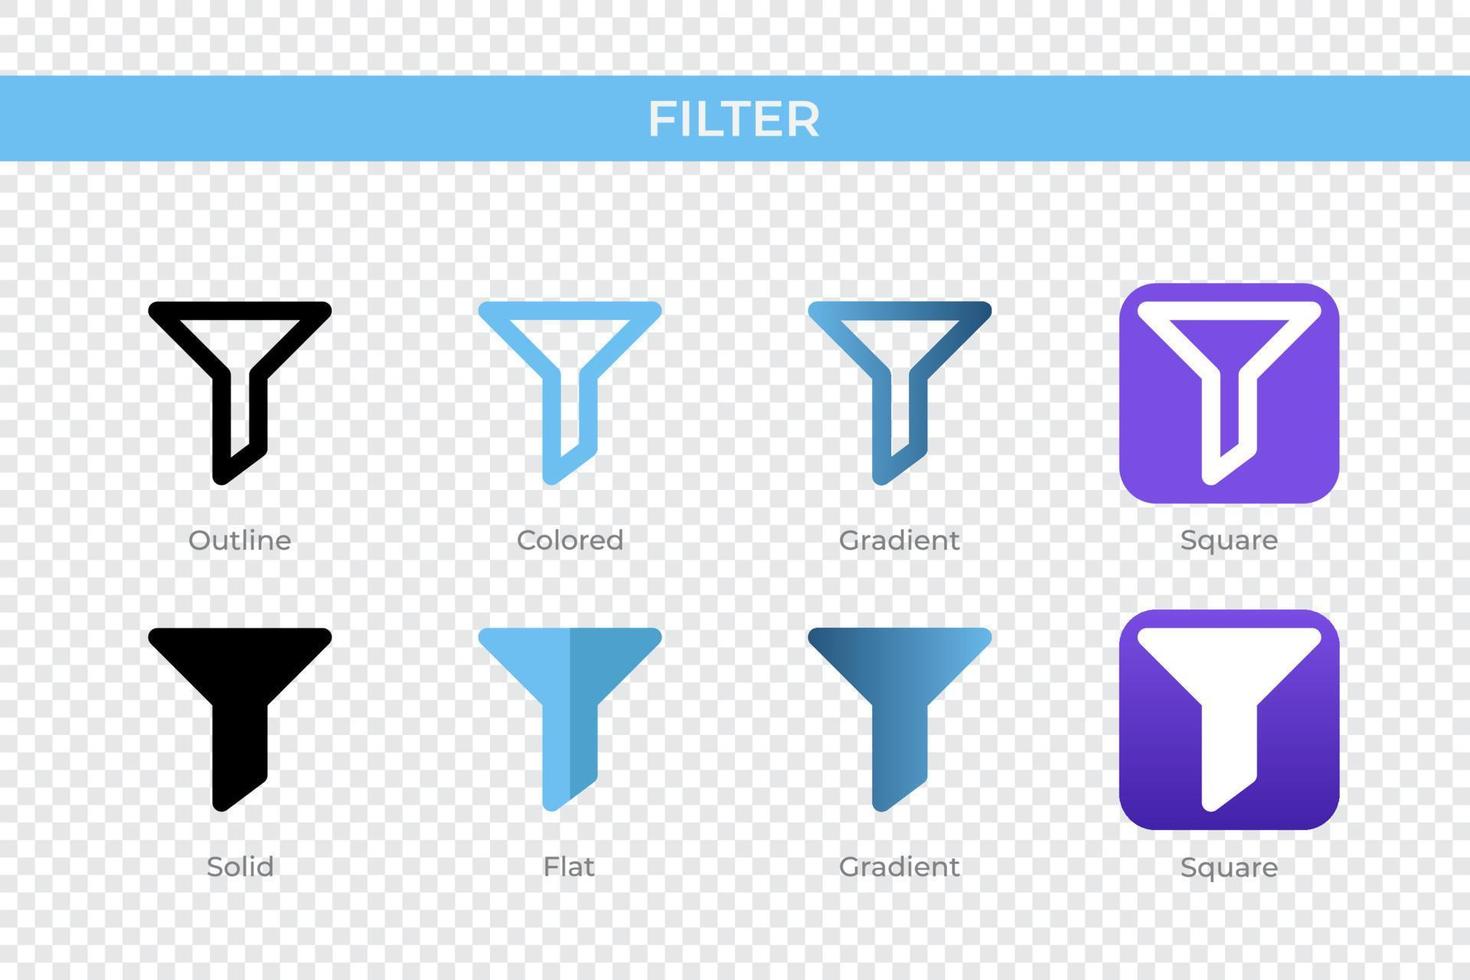 filter icon in different style. filter vector icons designed in outline, solid, colored, gradient, and flat style. Symbol, logo illustration. Vector illustration